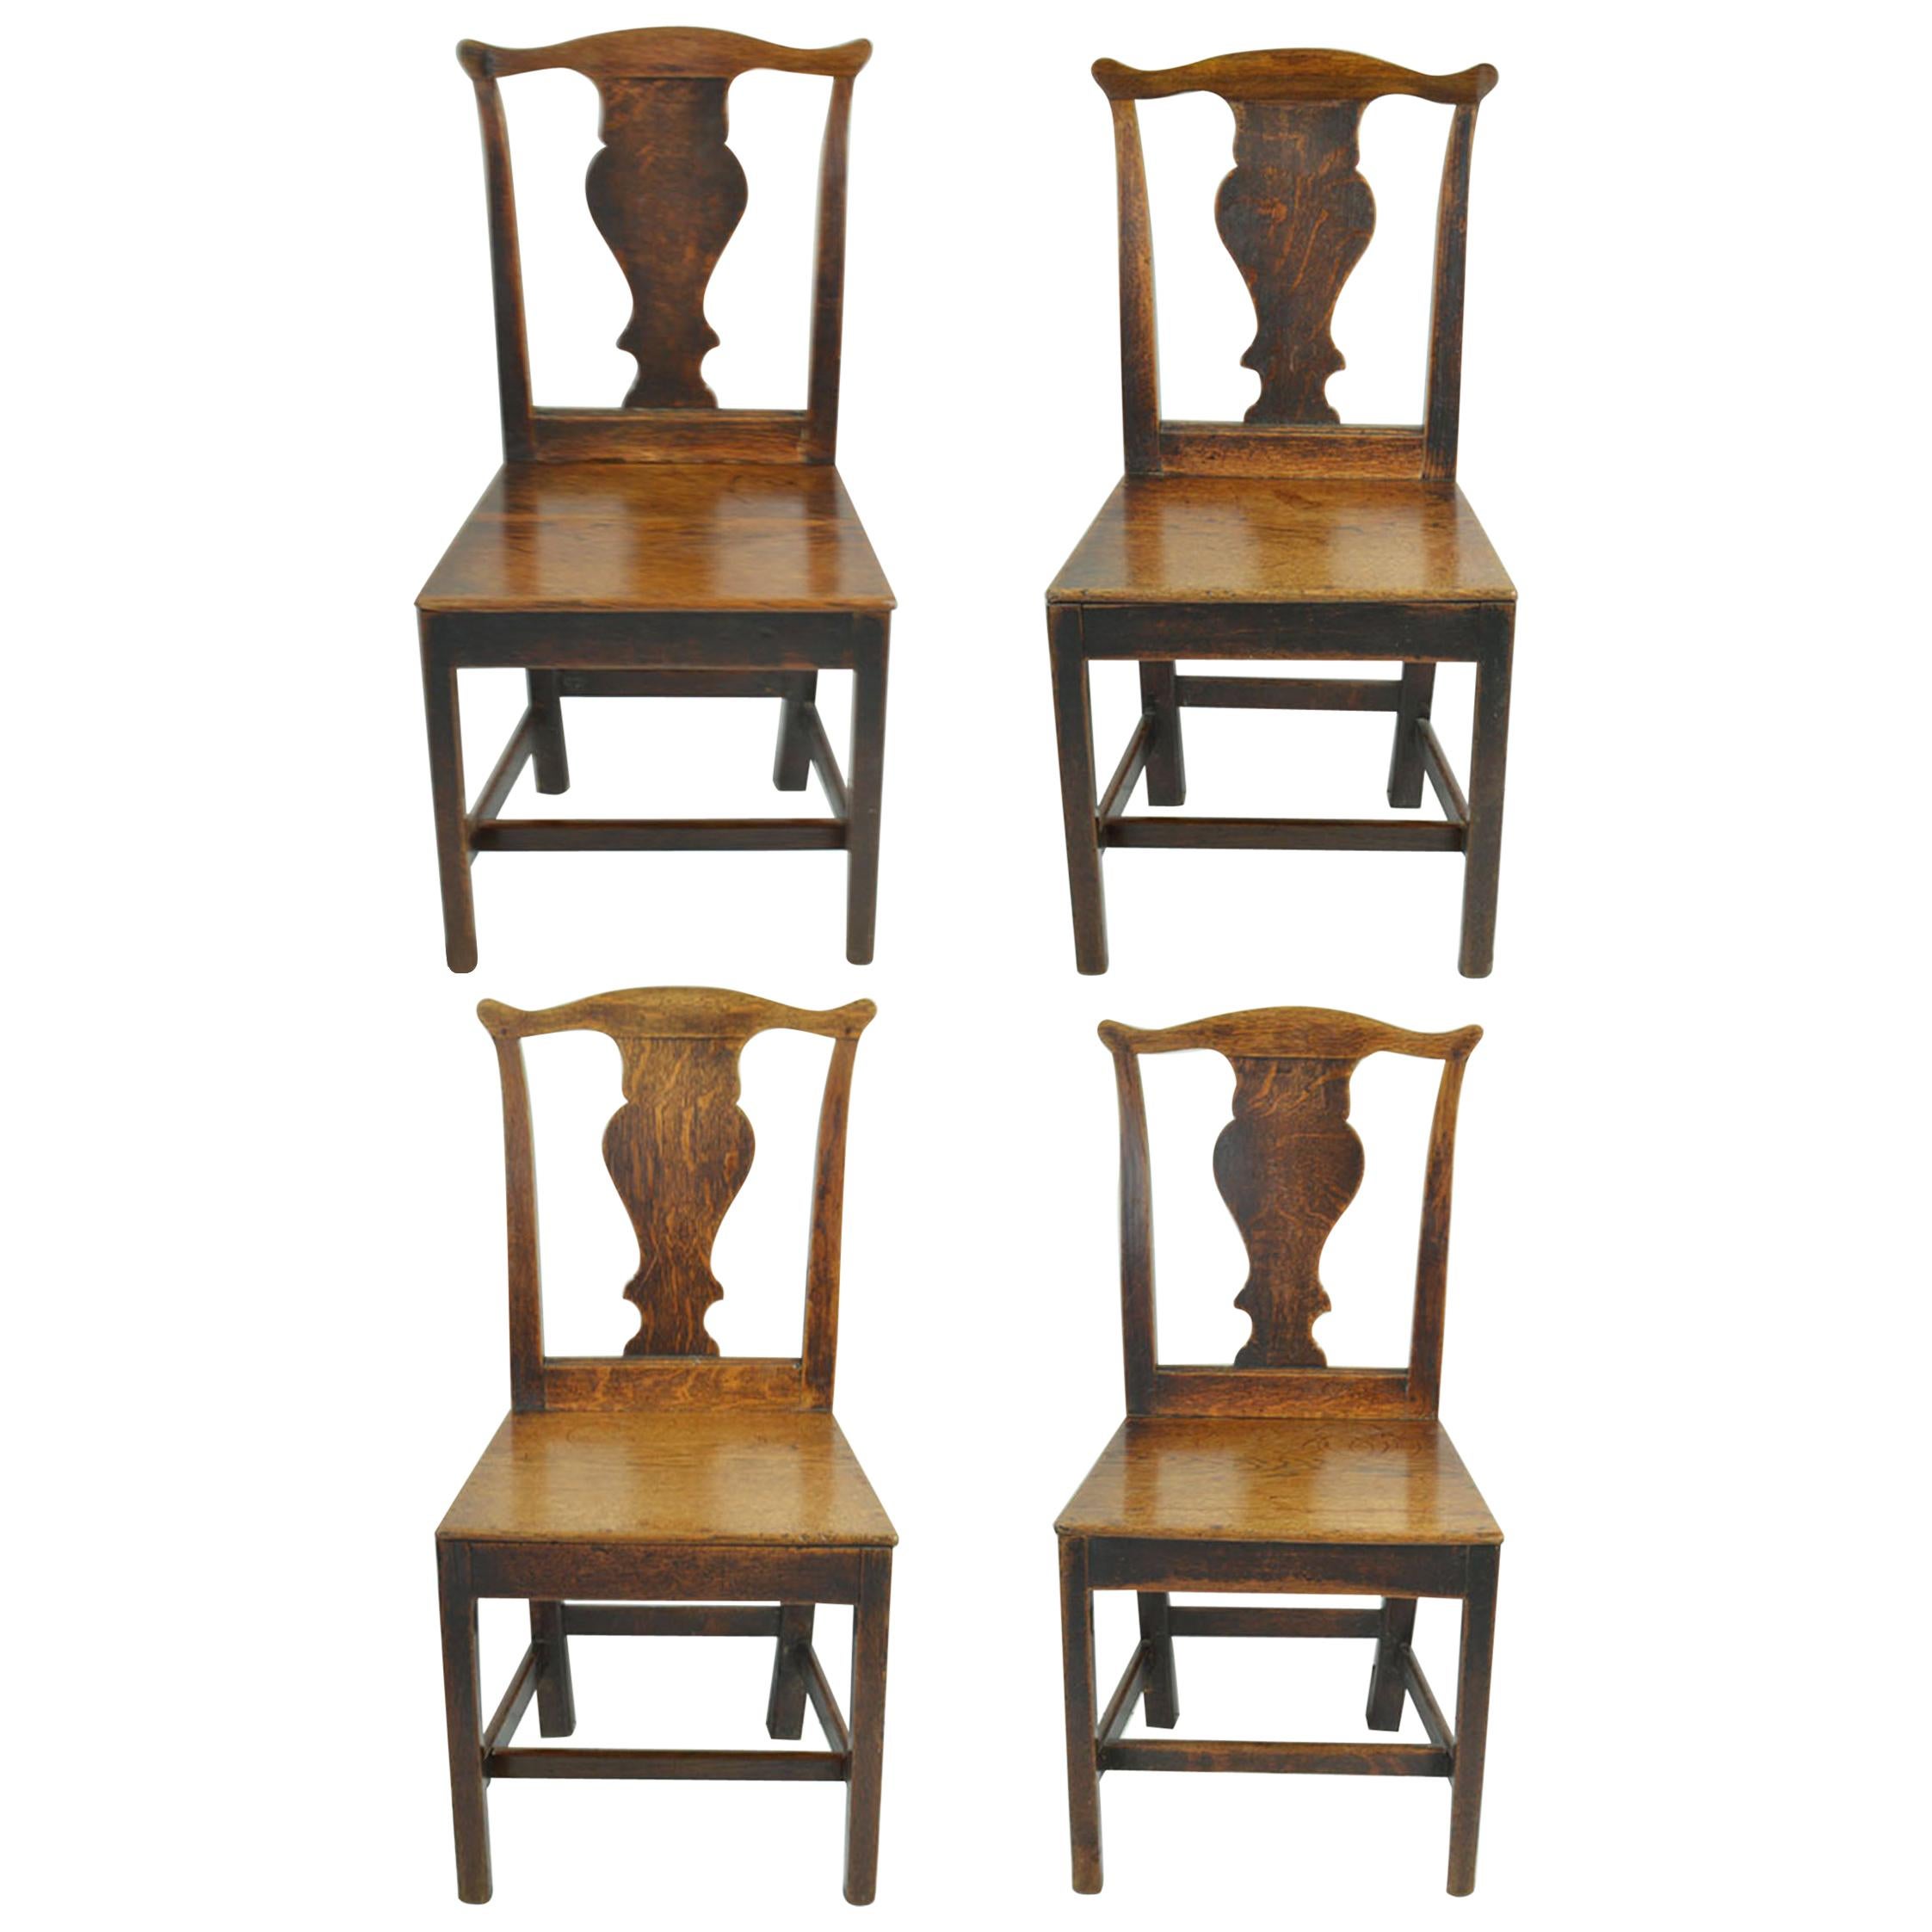 Set of 4 Antique Oak Country Chippendale Chairs, English, 18th Century